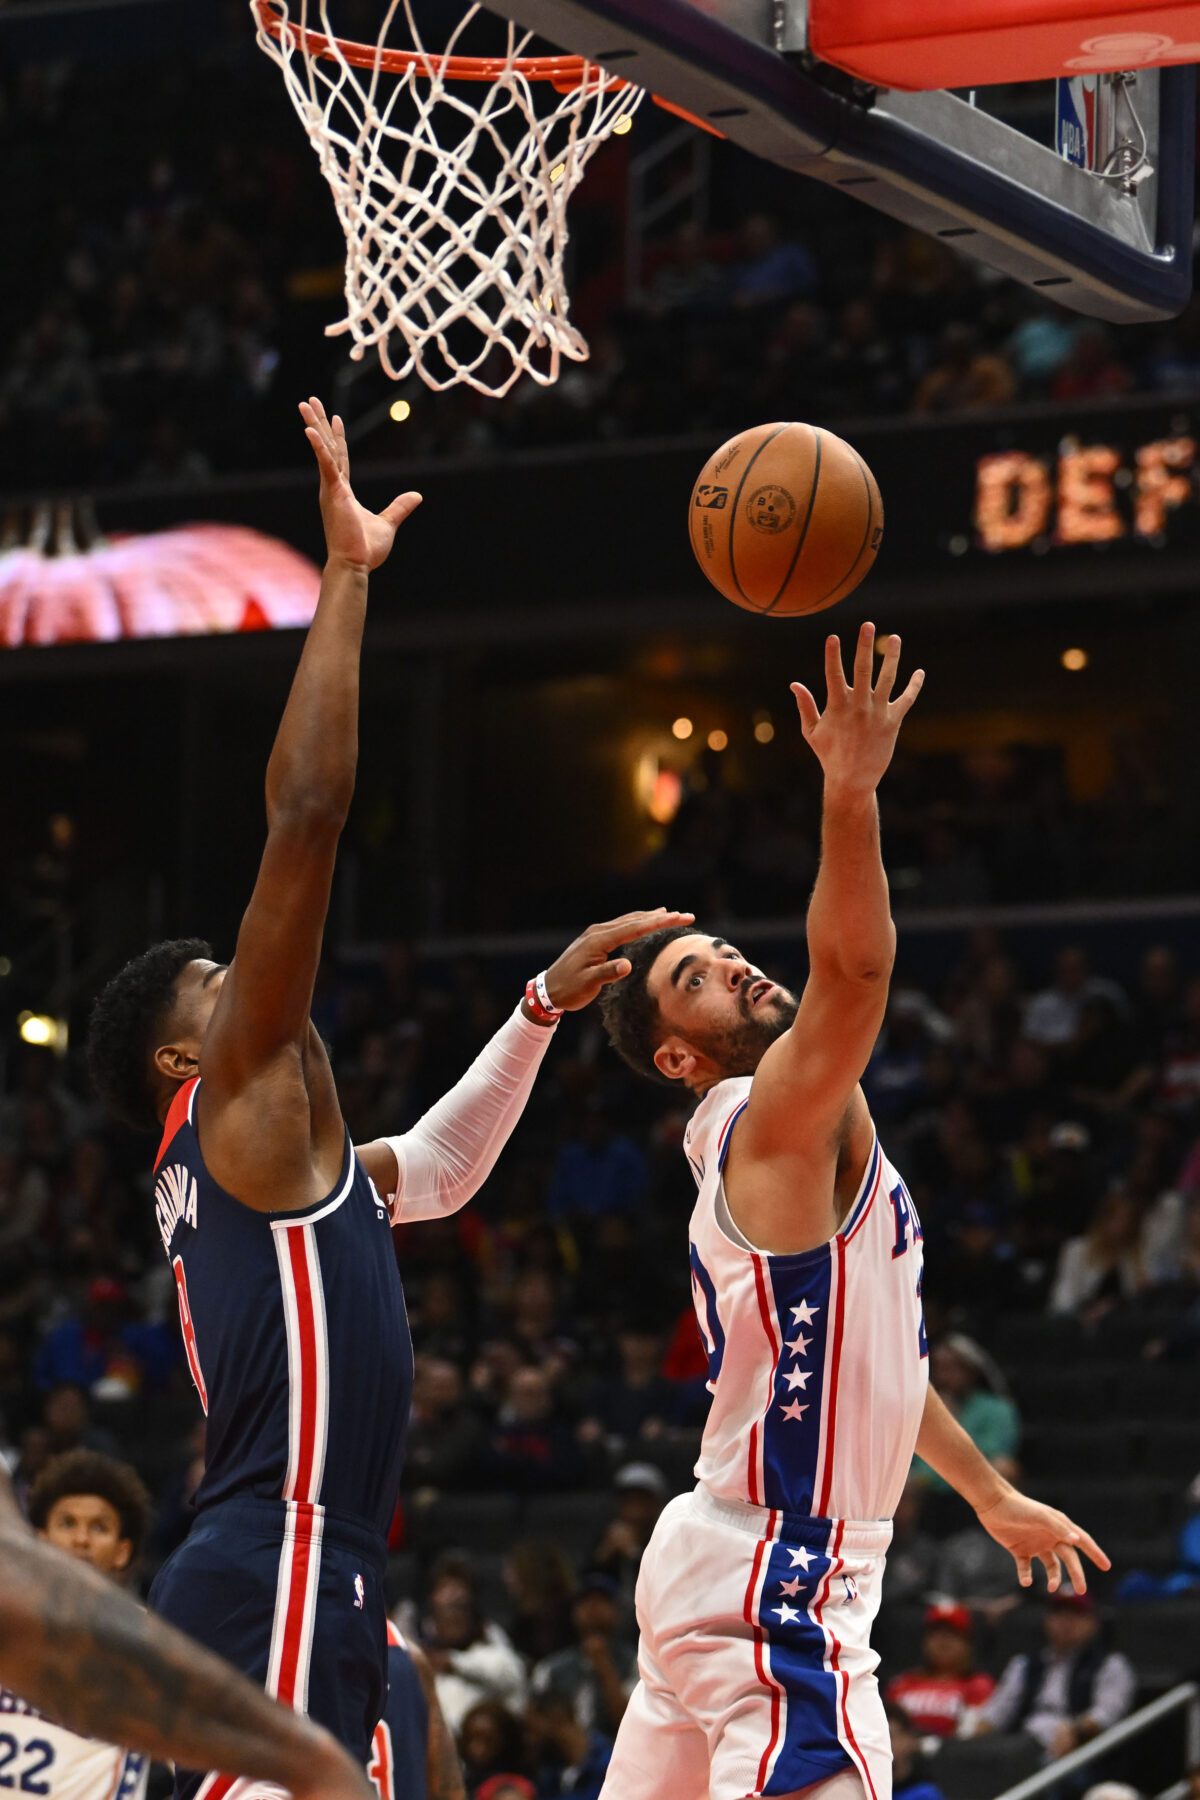 Sixers praise bench unit for their efforts in road win over Wizards